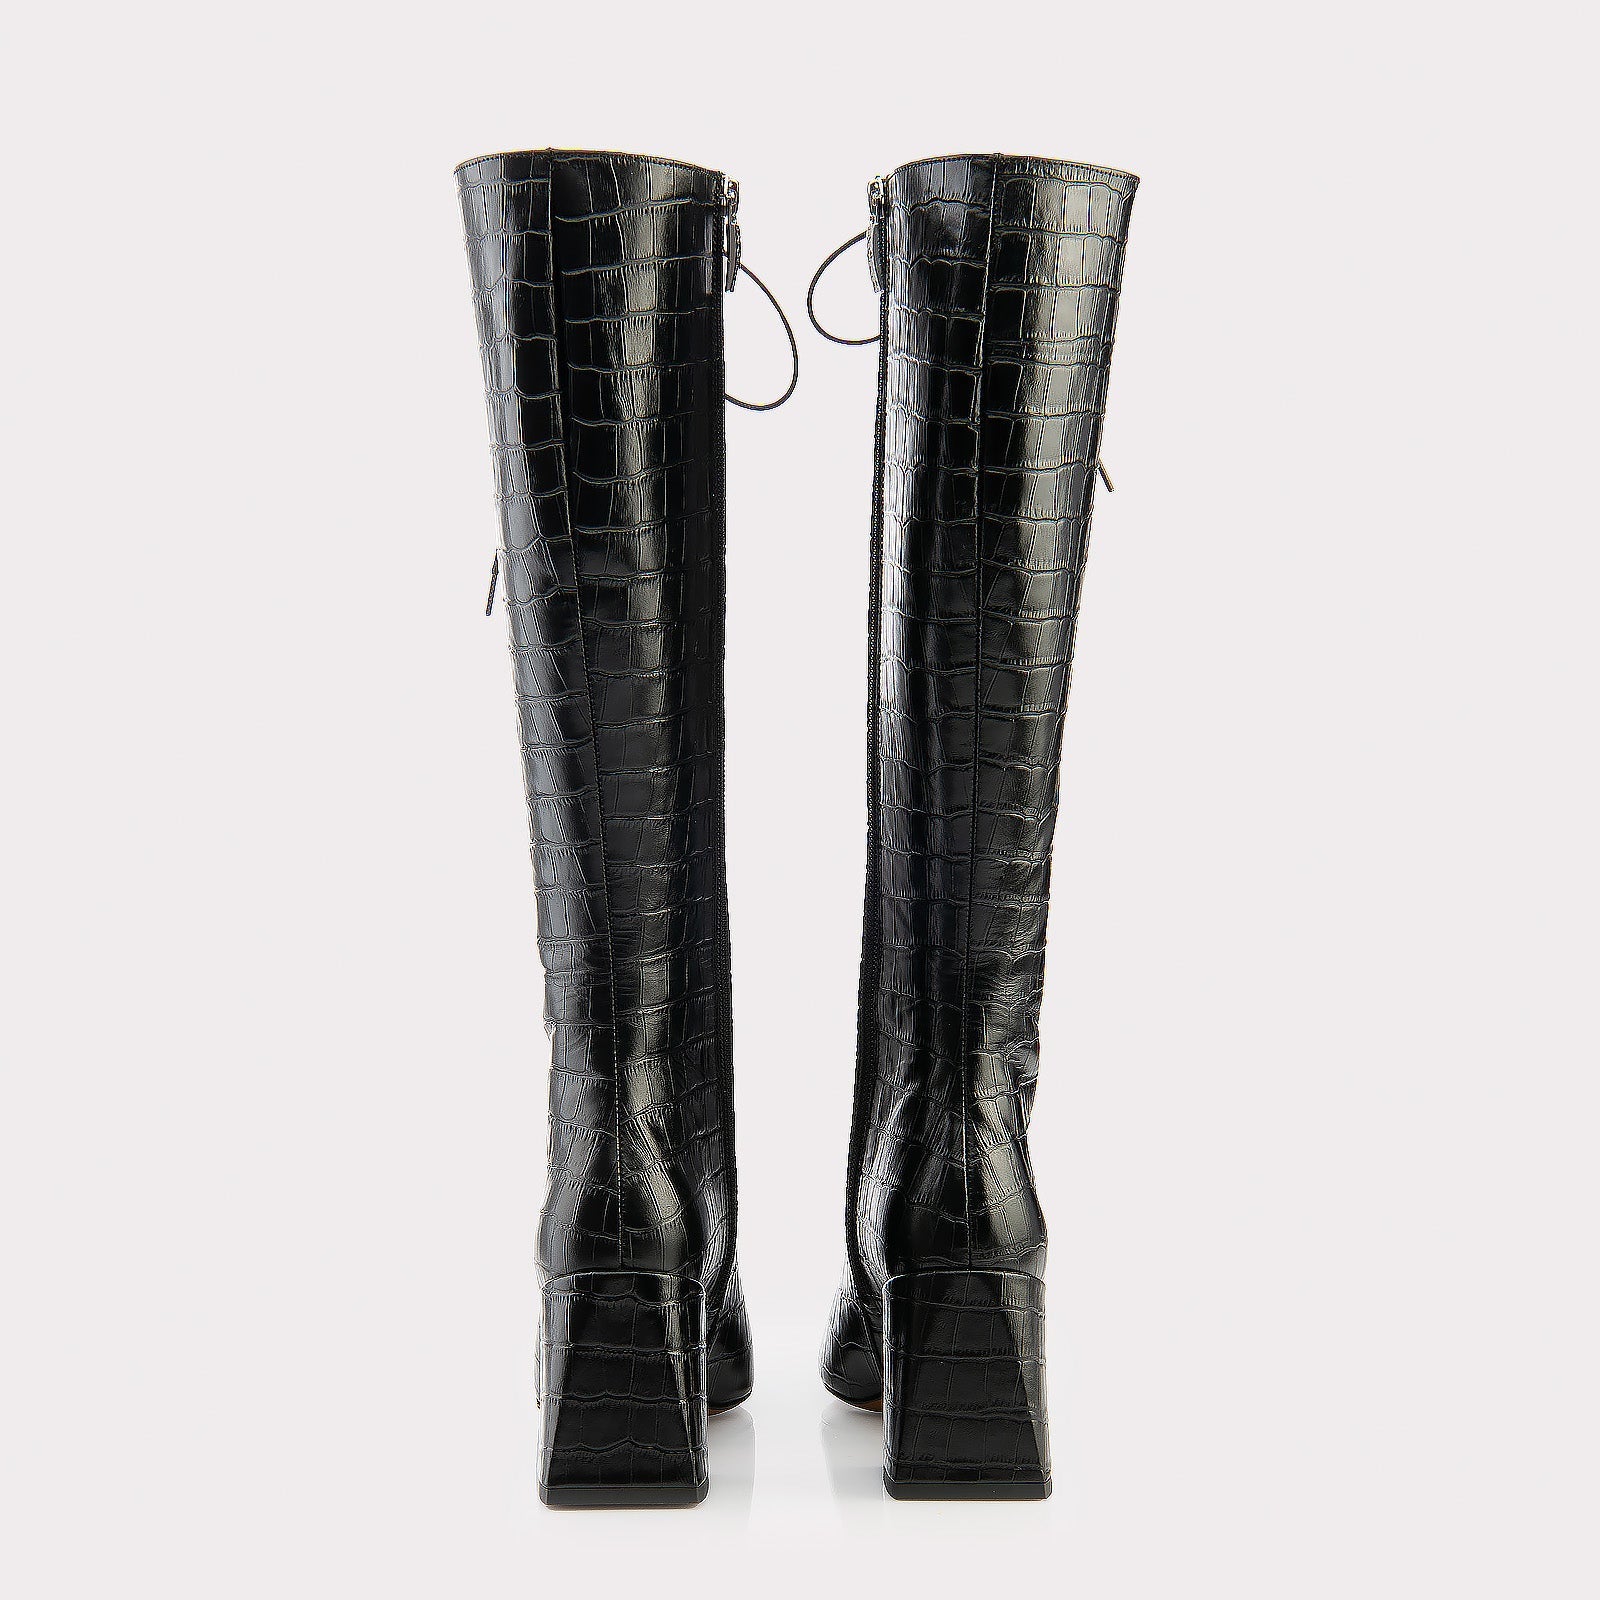 TEXTURED LEATHER BOOTS MONICA BLACK